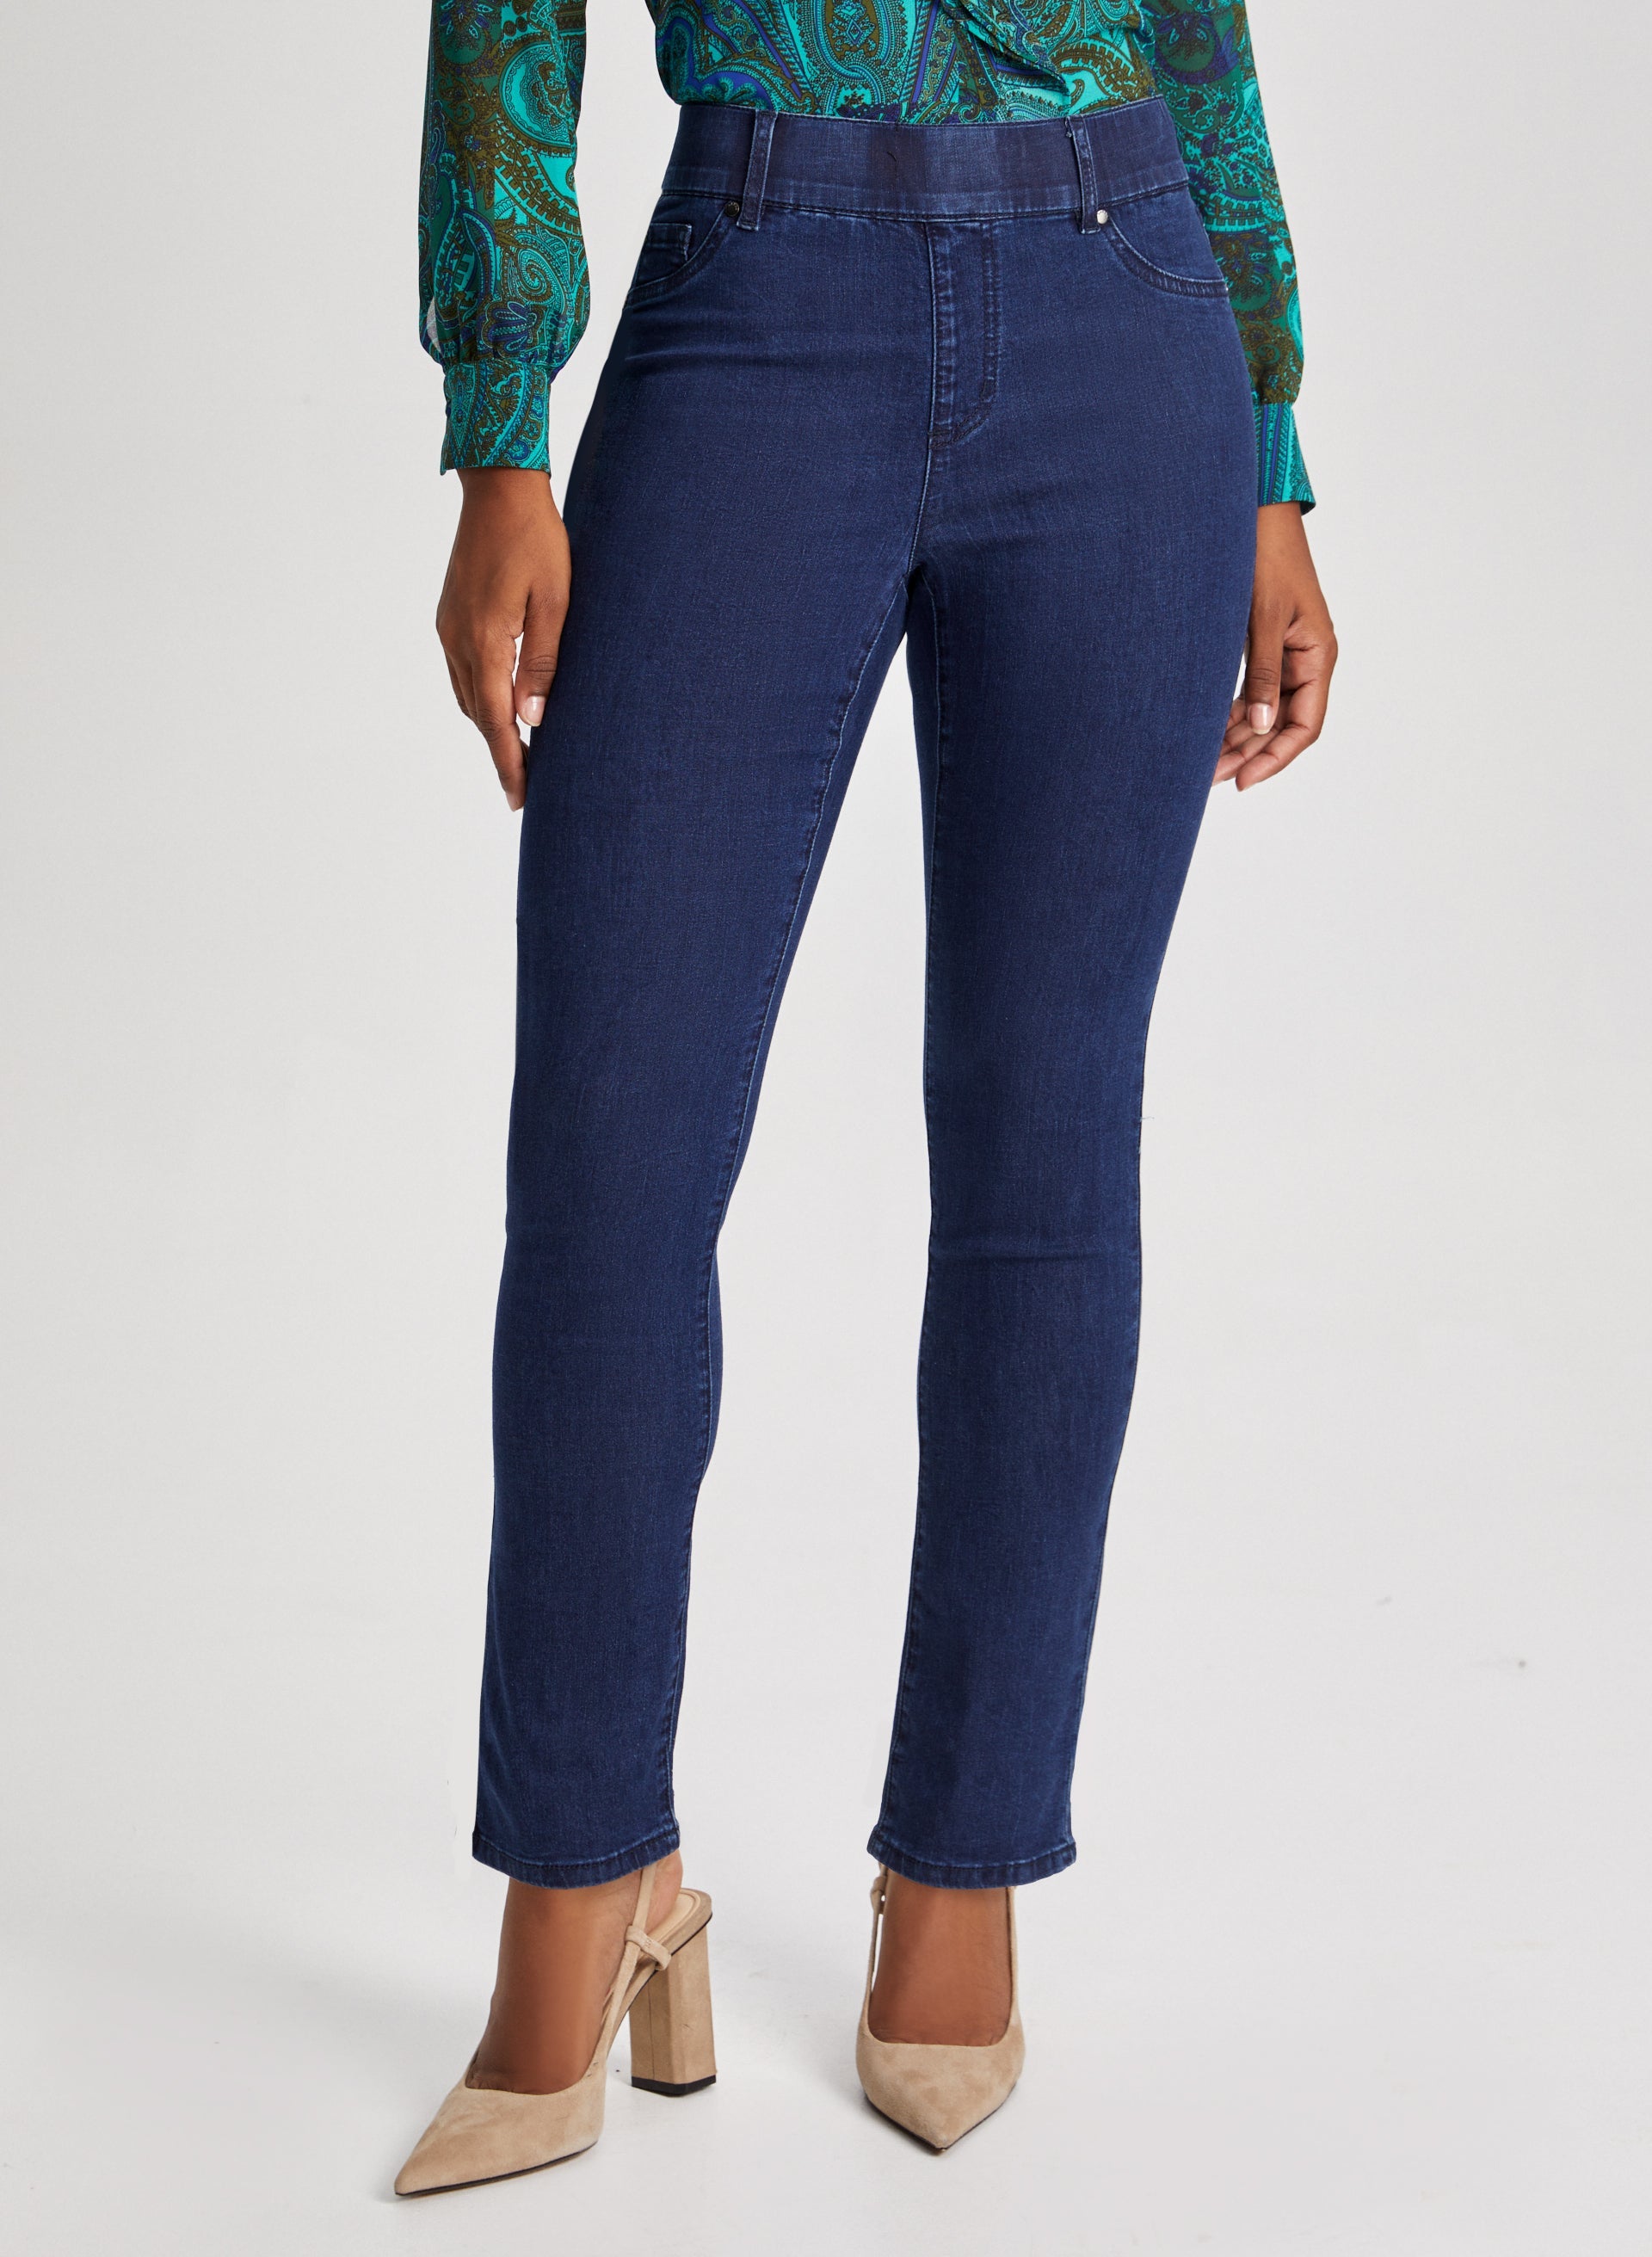 Plus Size High Waisted Straight Leg Jeans